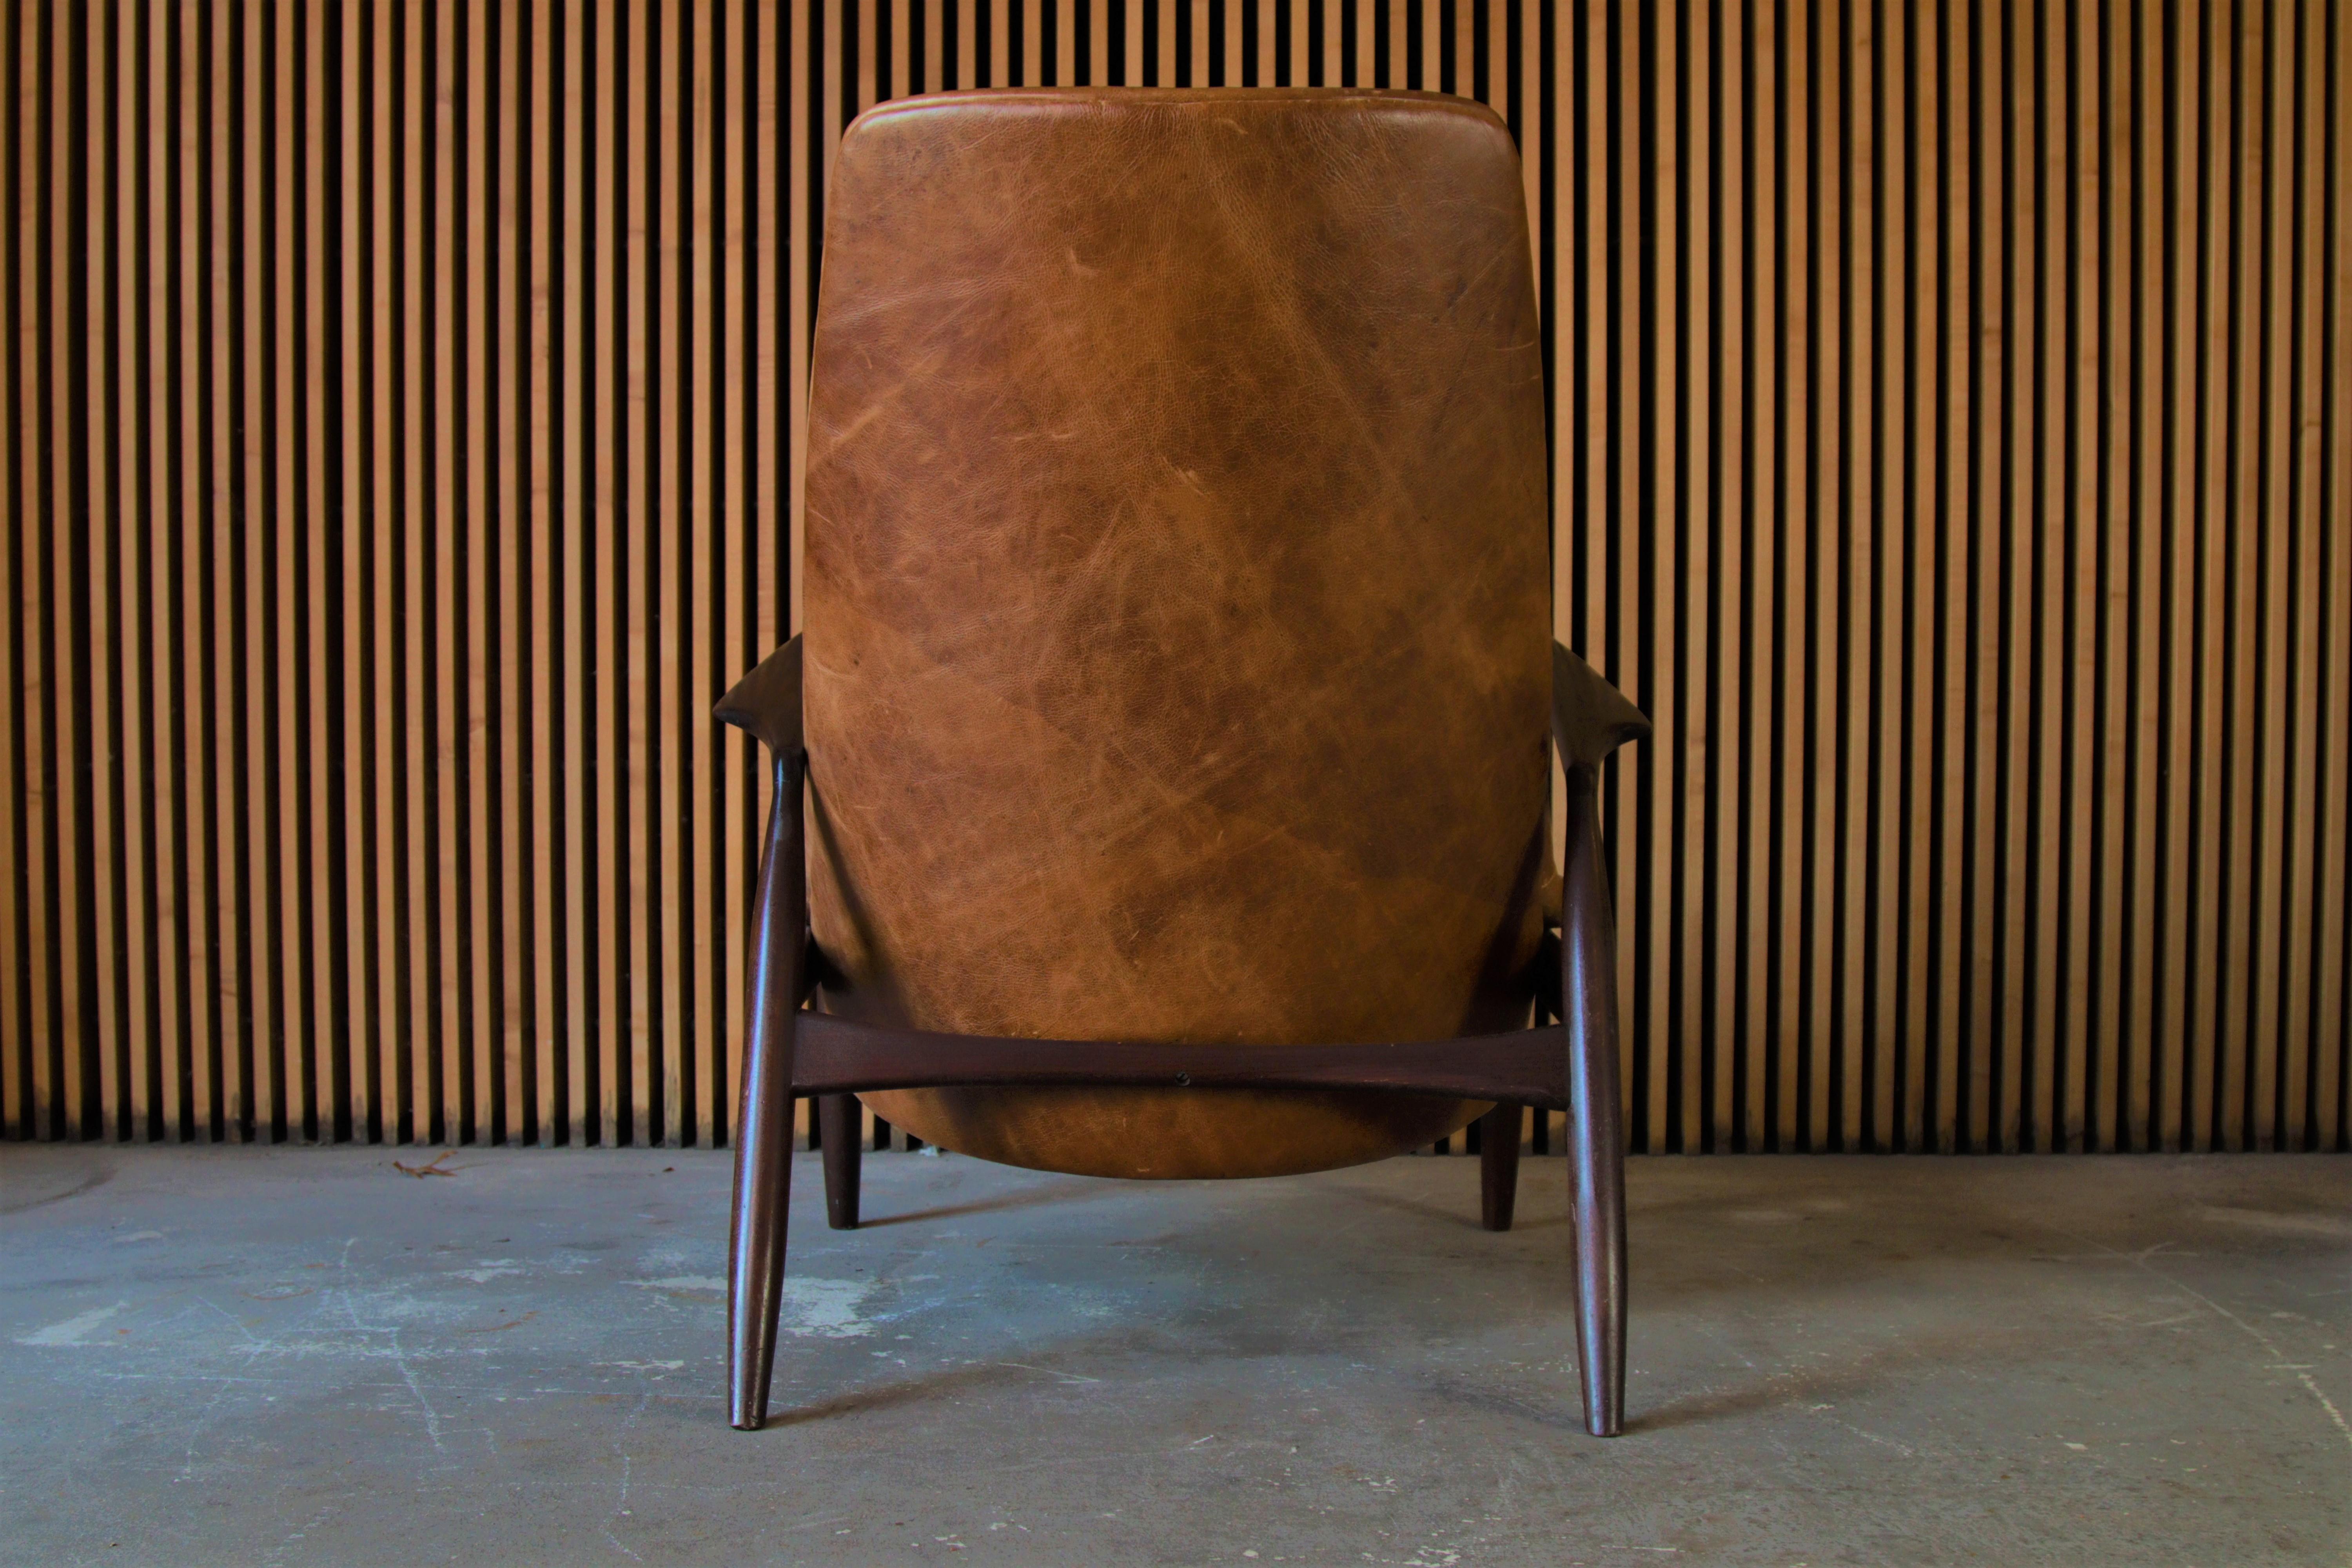 20th Century 1950s Ib Kofod-Larsen Seal Chair in Afromosia Teak and Cognac Leather